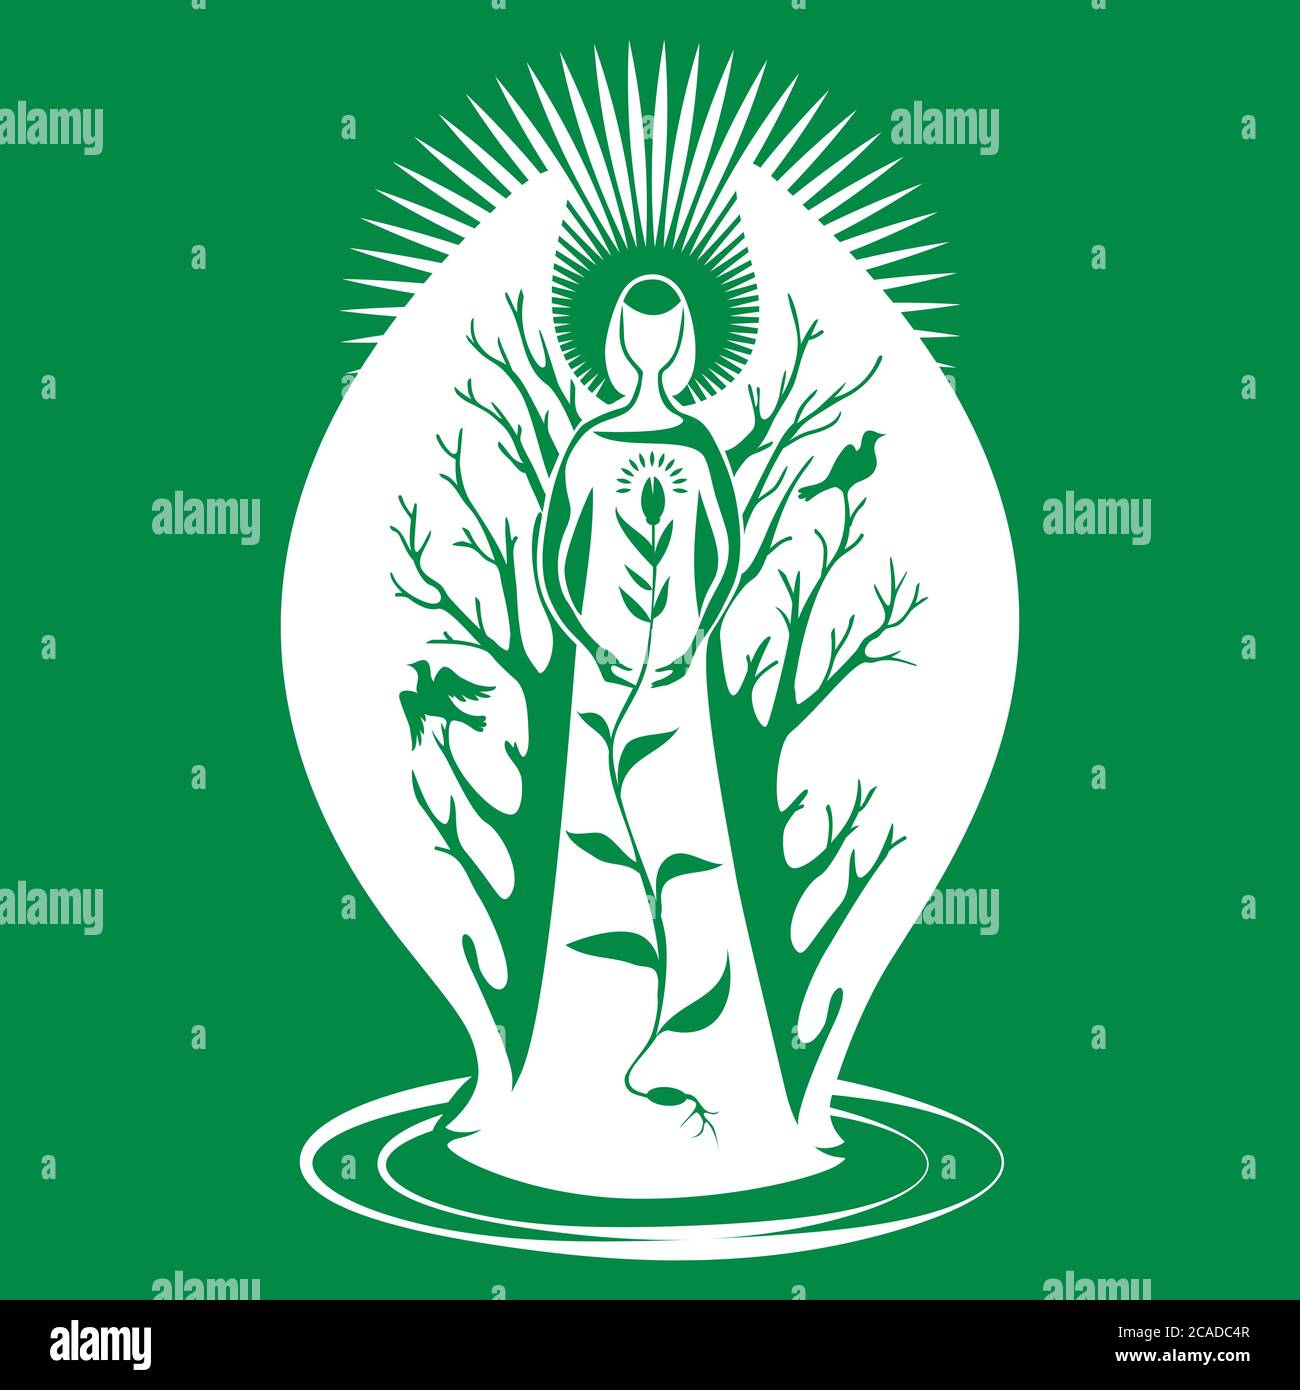 An angel, a guardian of nature with wings, guards the germinated grain. Silhouette isolated on green background, logo. Stock Vector